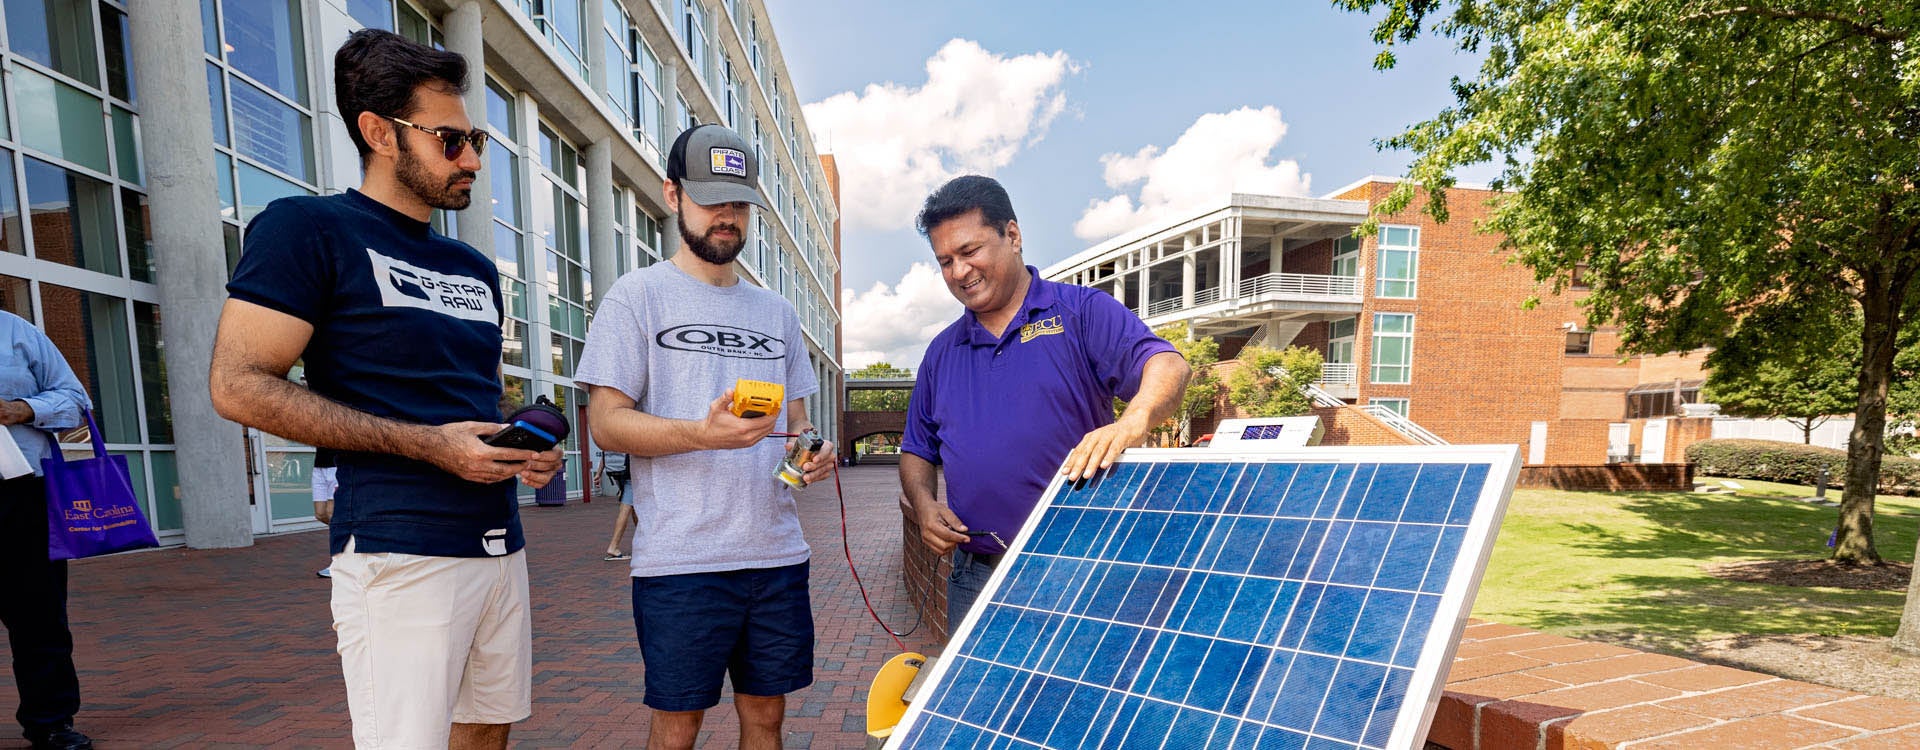 Solar energy, as demonstrated outside the Science and Technology Building last year, is part of the Clean Carolinas NSF grant initiative. (Photo by Cliff Hollis)